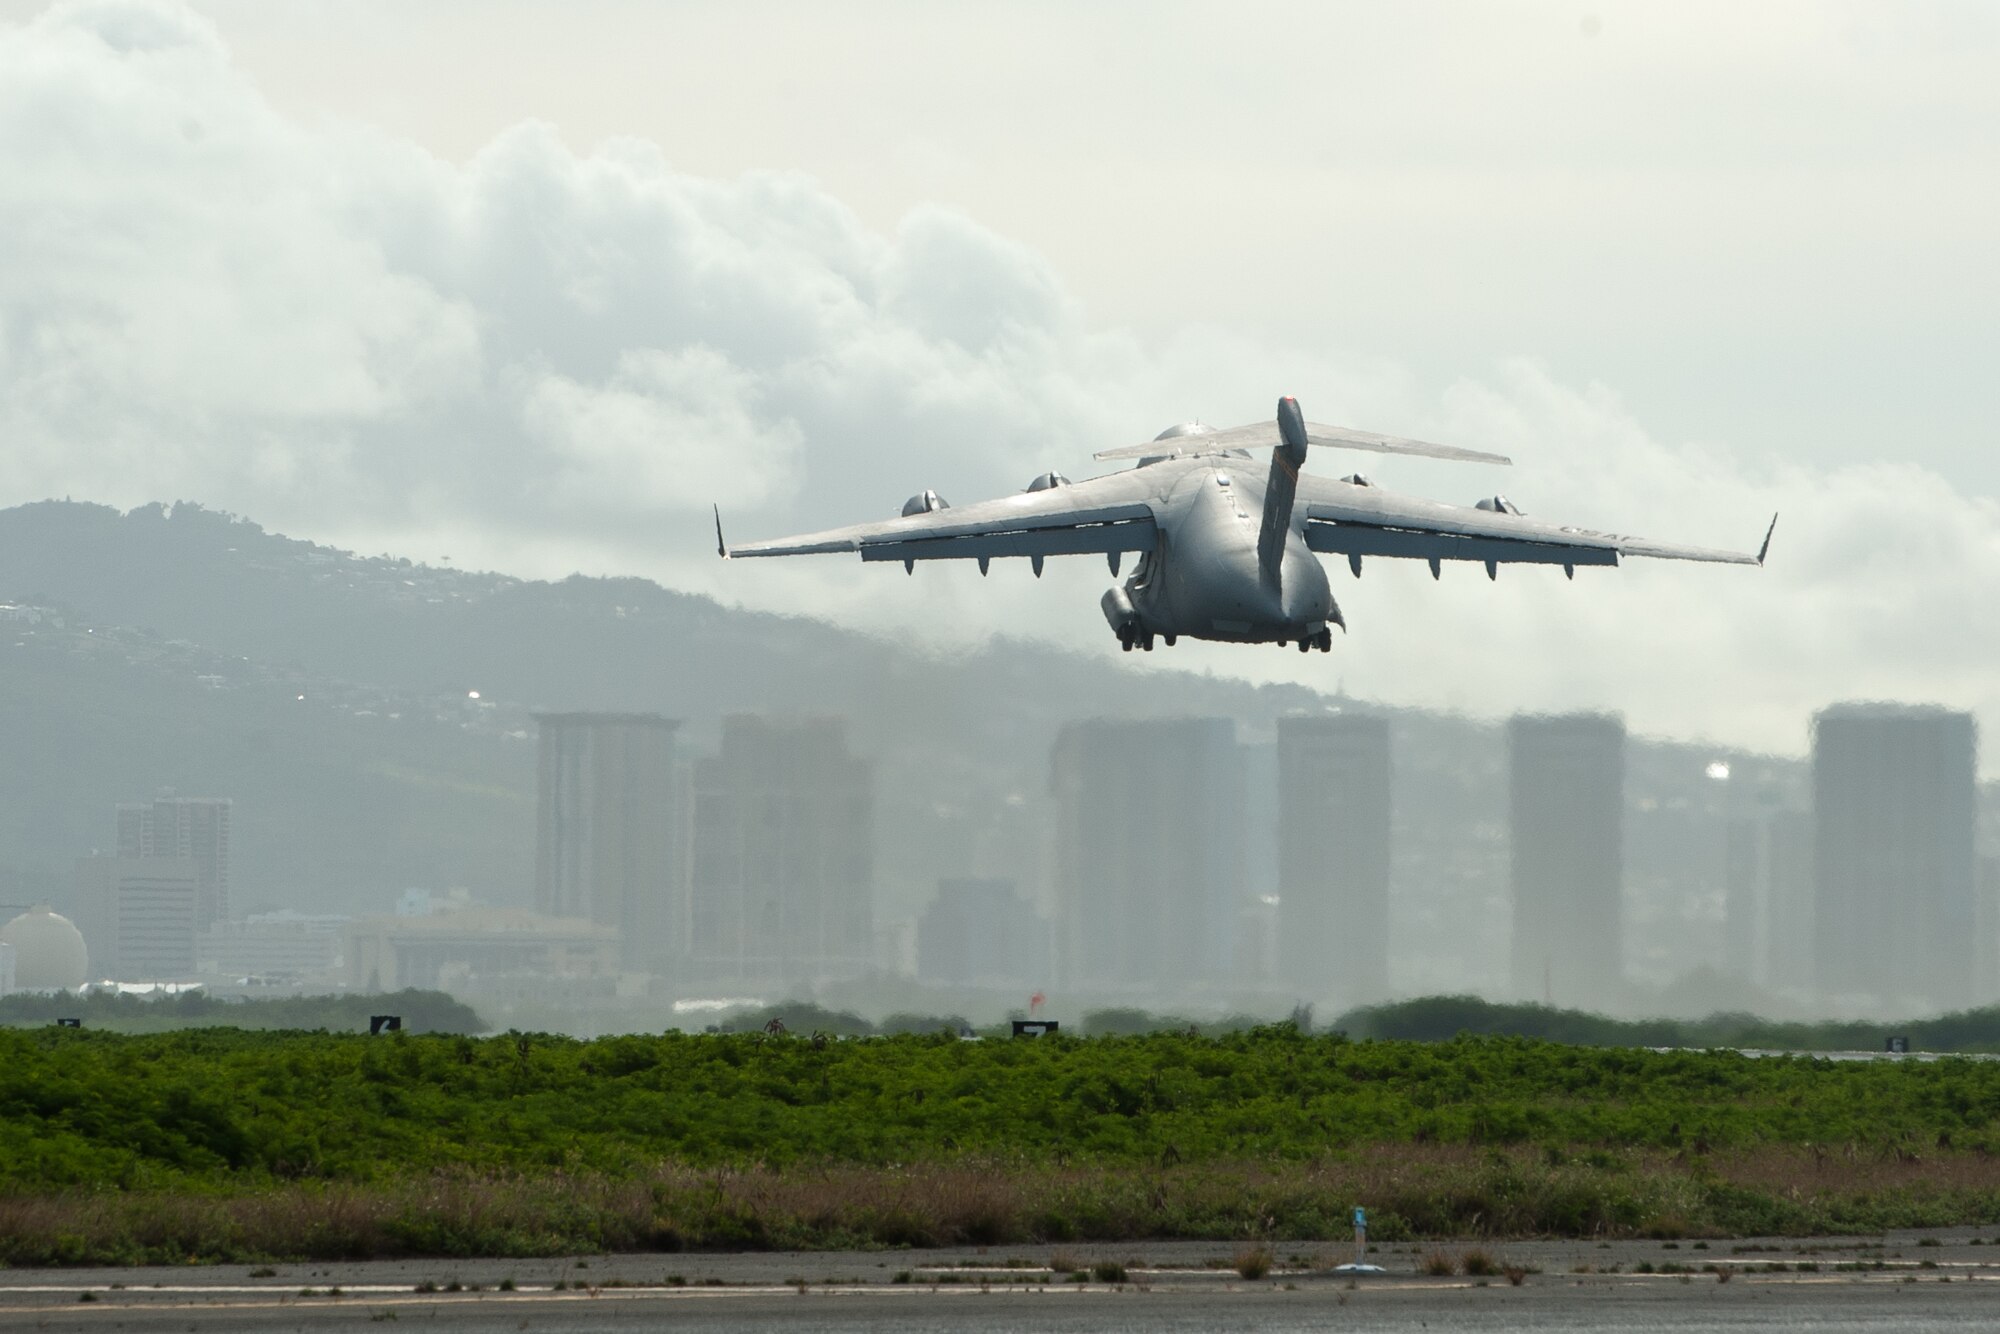 A 535th Airlift Squadron A C-17 Globemaster III takes off from Joint Base Pearl Harbor-Hickam, Hawaii, April  3, 2020.  The 735th Air Mobility Squadron loaded 31,063 pounds of cargo containing COVID-19 personal protective equipment and medical supplies from the CDC and FEMA that were delivered to the Mariana Islands.  (U.S. Air National Guard photo by Senior Airman John Linzmeier)